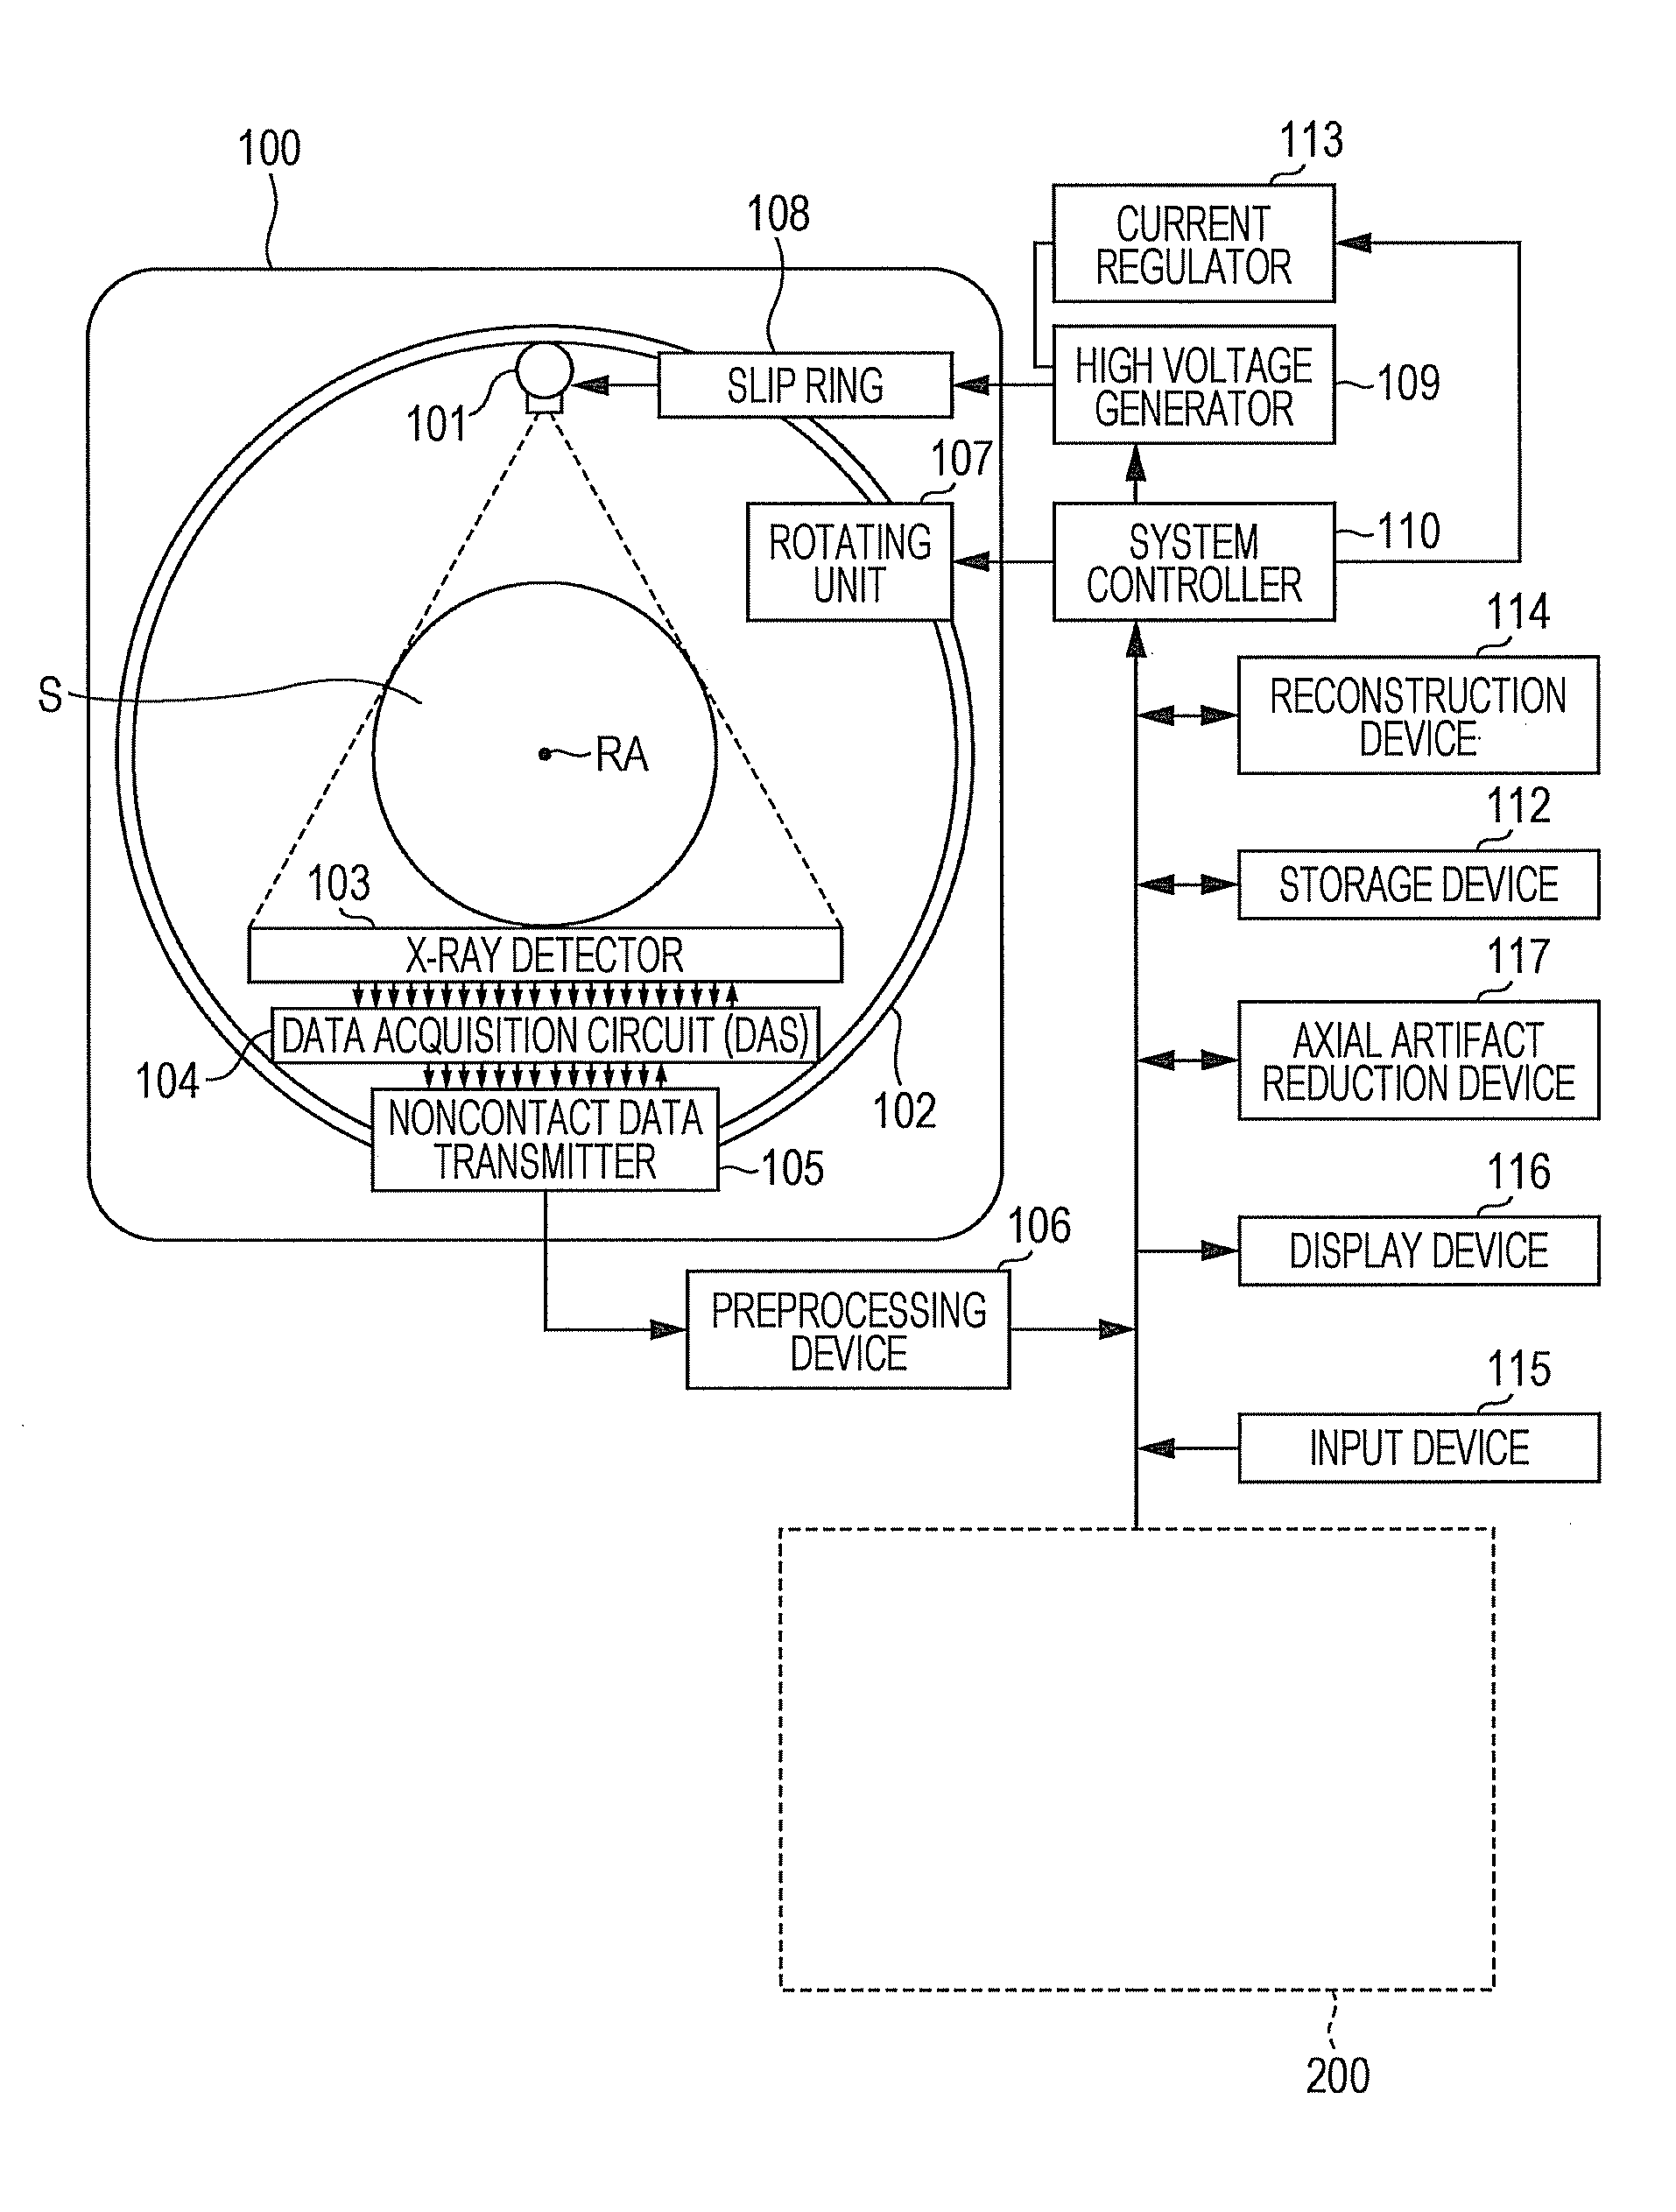 Method and system for expanding axial coverage in iterative reconstruction in computer tomography (CT)